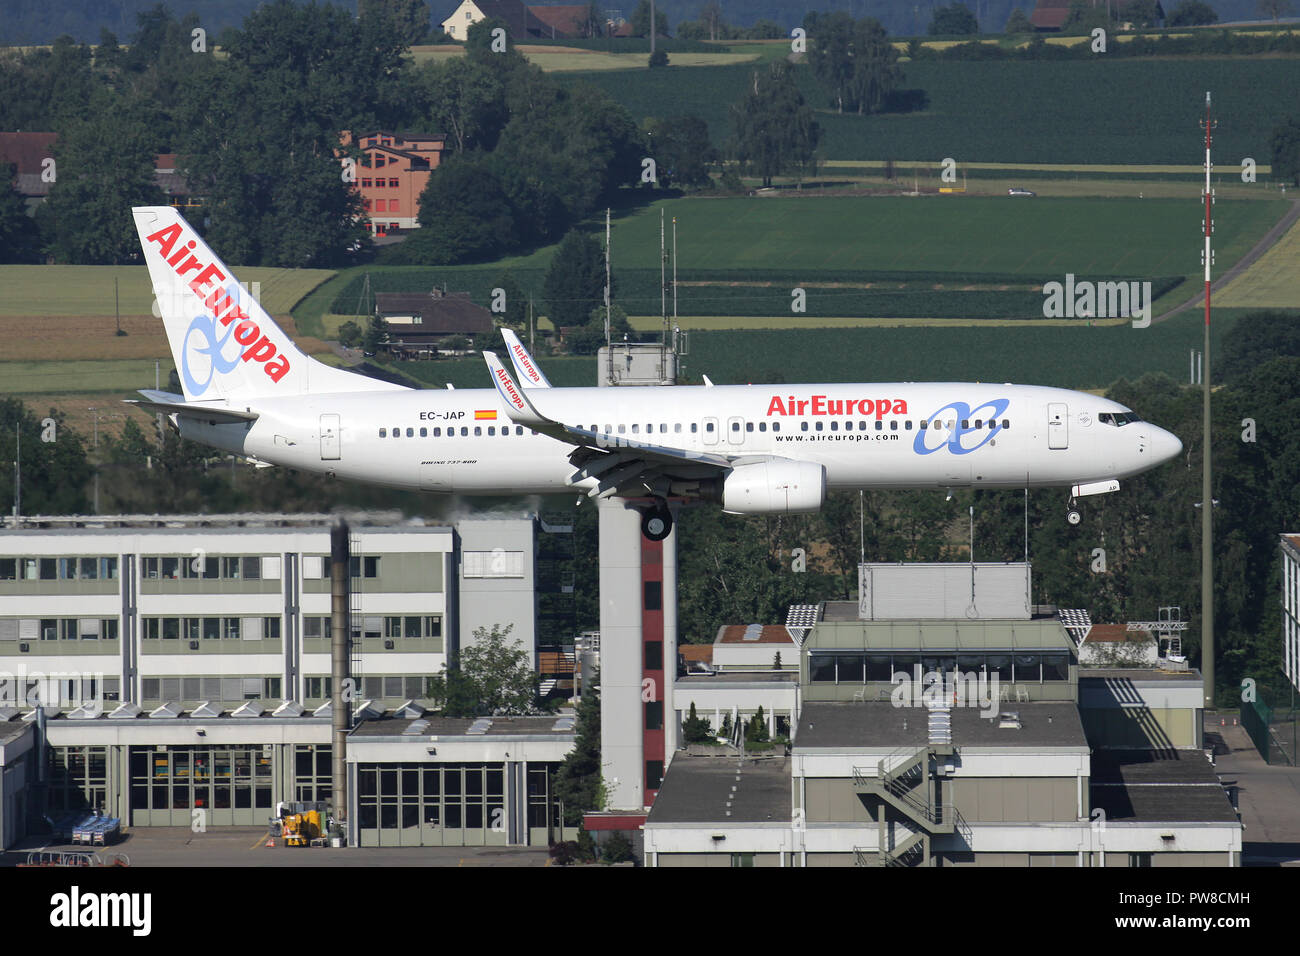 Spanish Air Europa Boeing 737-800 with registration EC-JAP on short final for runway 34 of Zurich Airport. Stock Photo